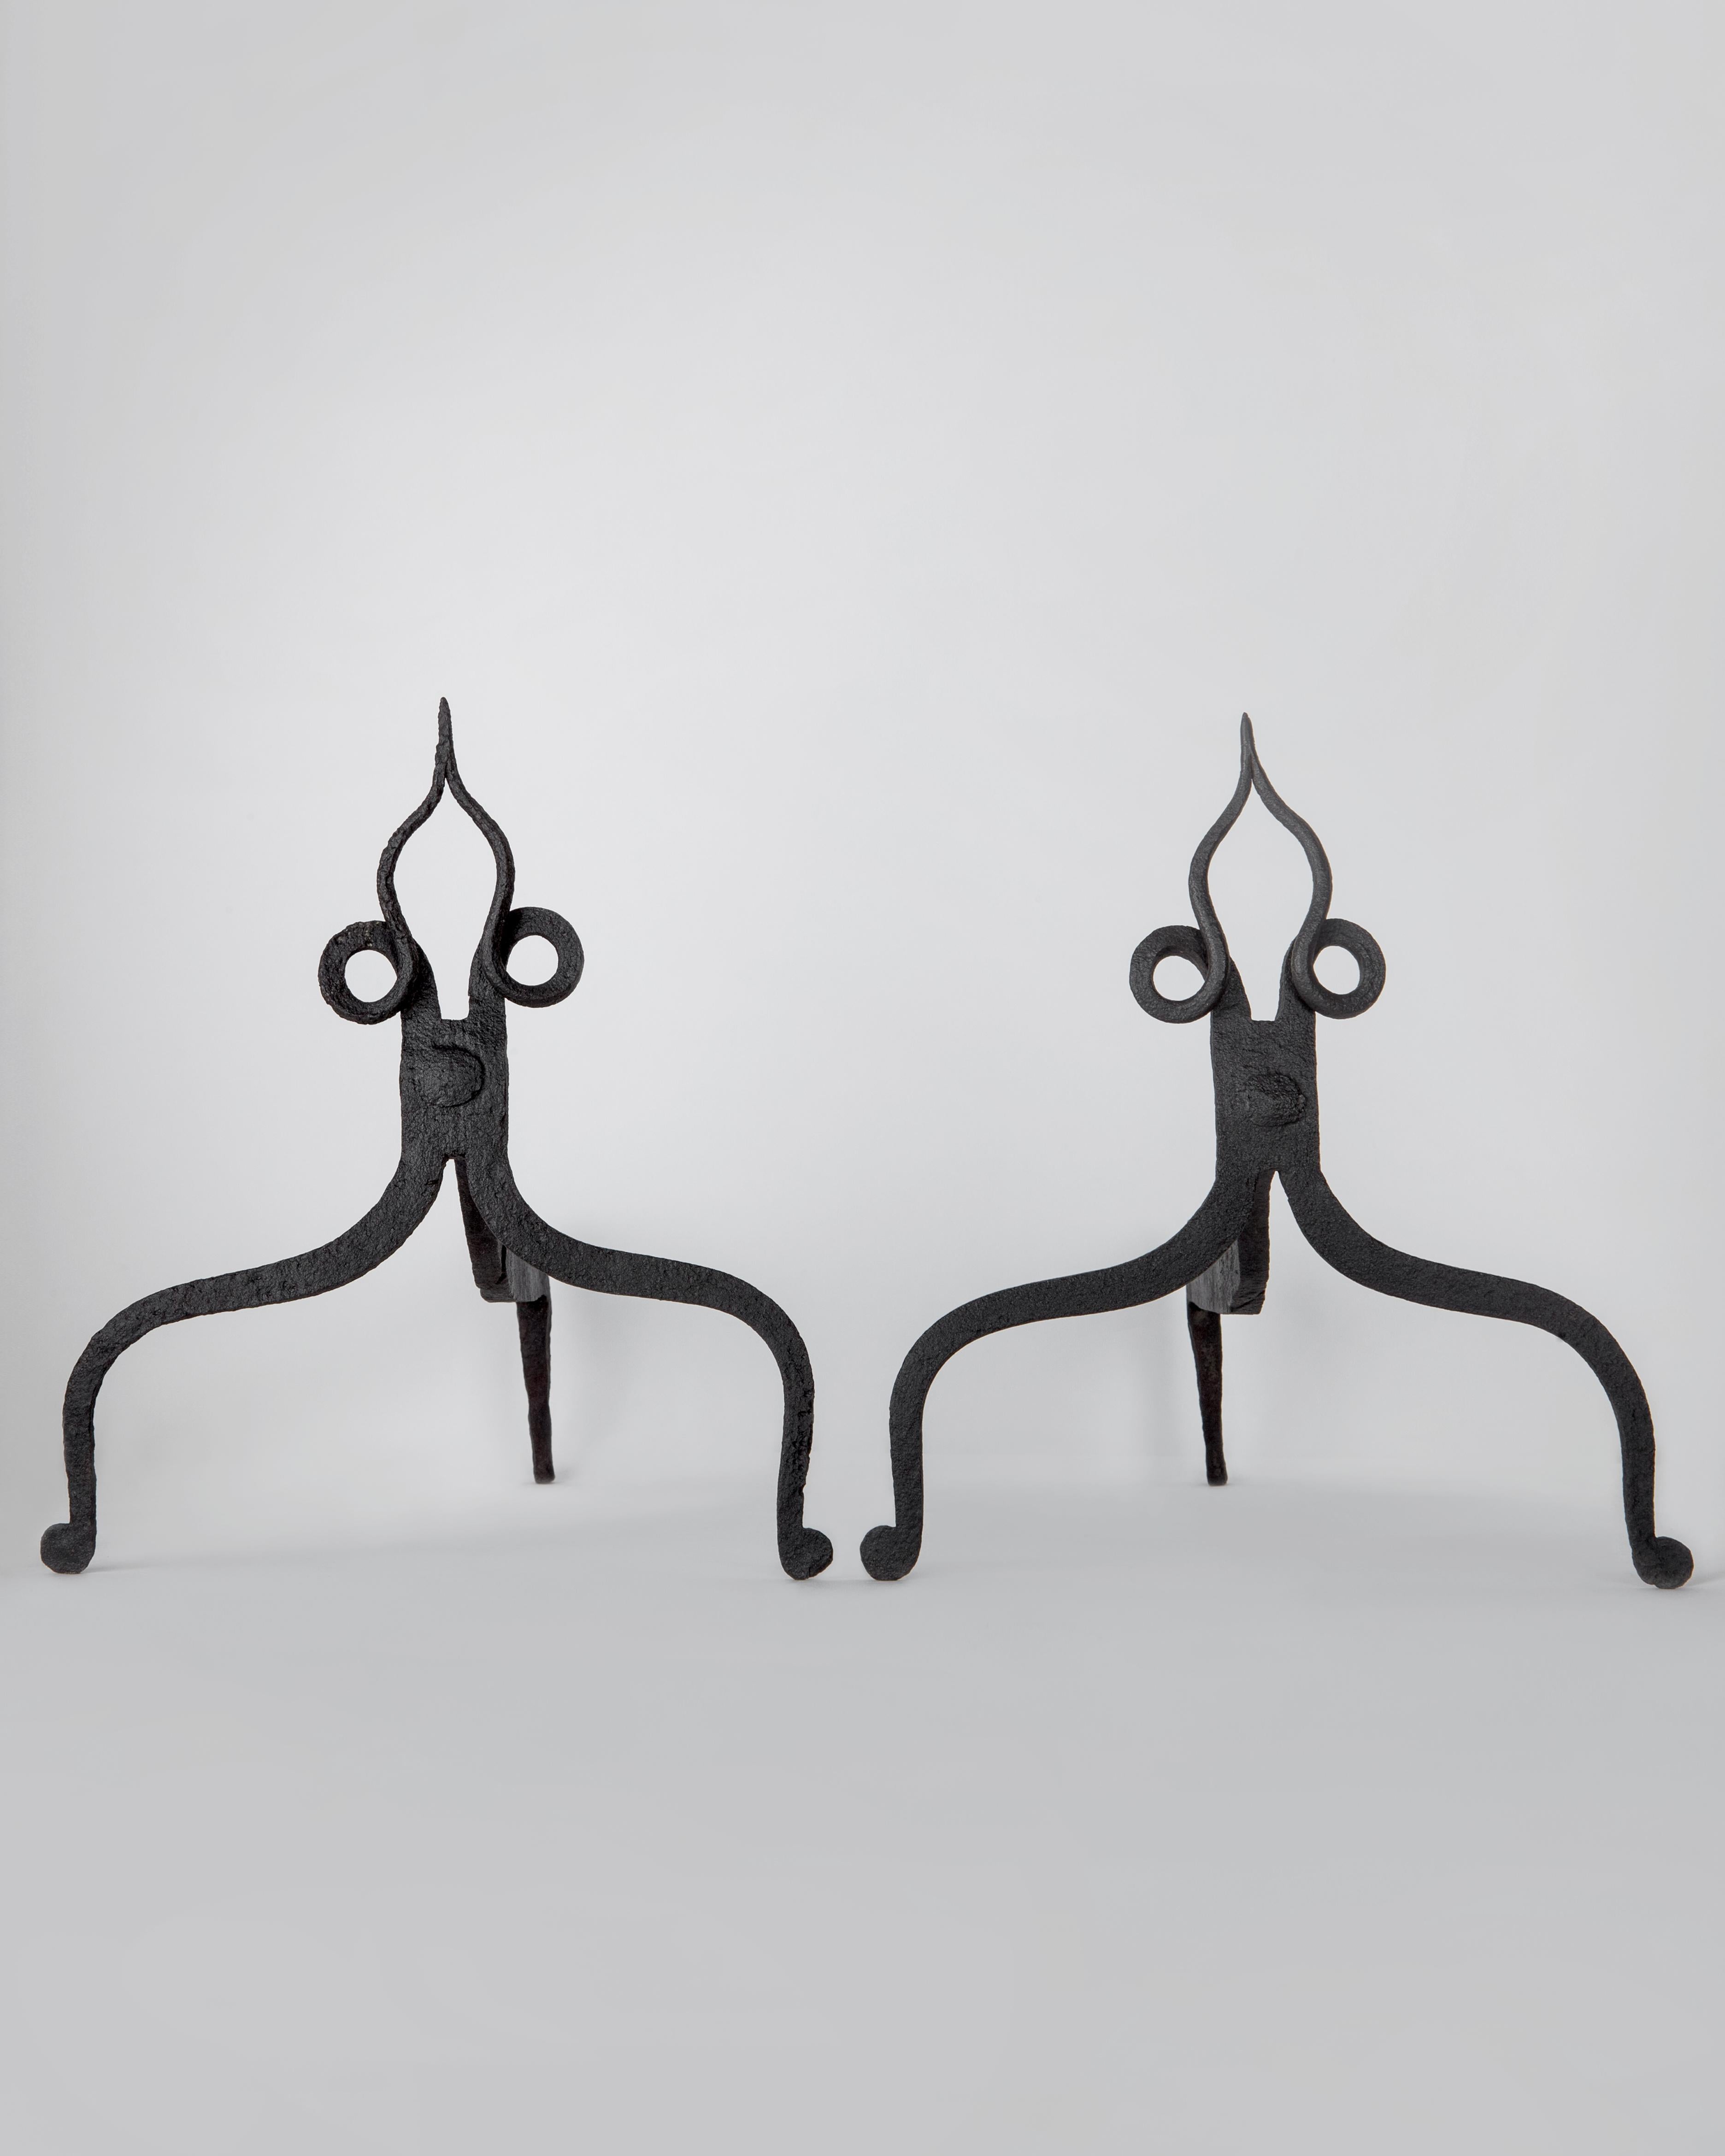 Arts and Crafts Rustic Blackened Wrought Iron Andirons, with Spade Shaped Finials, Circa 1920s For Sale